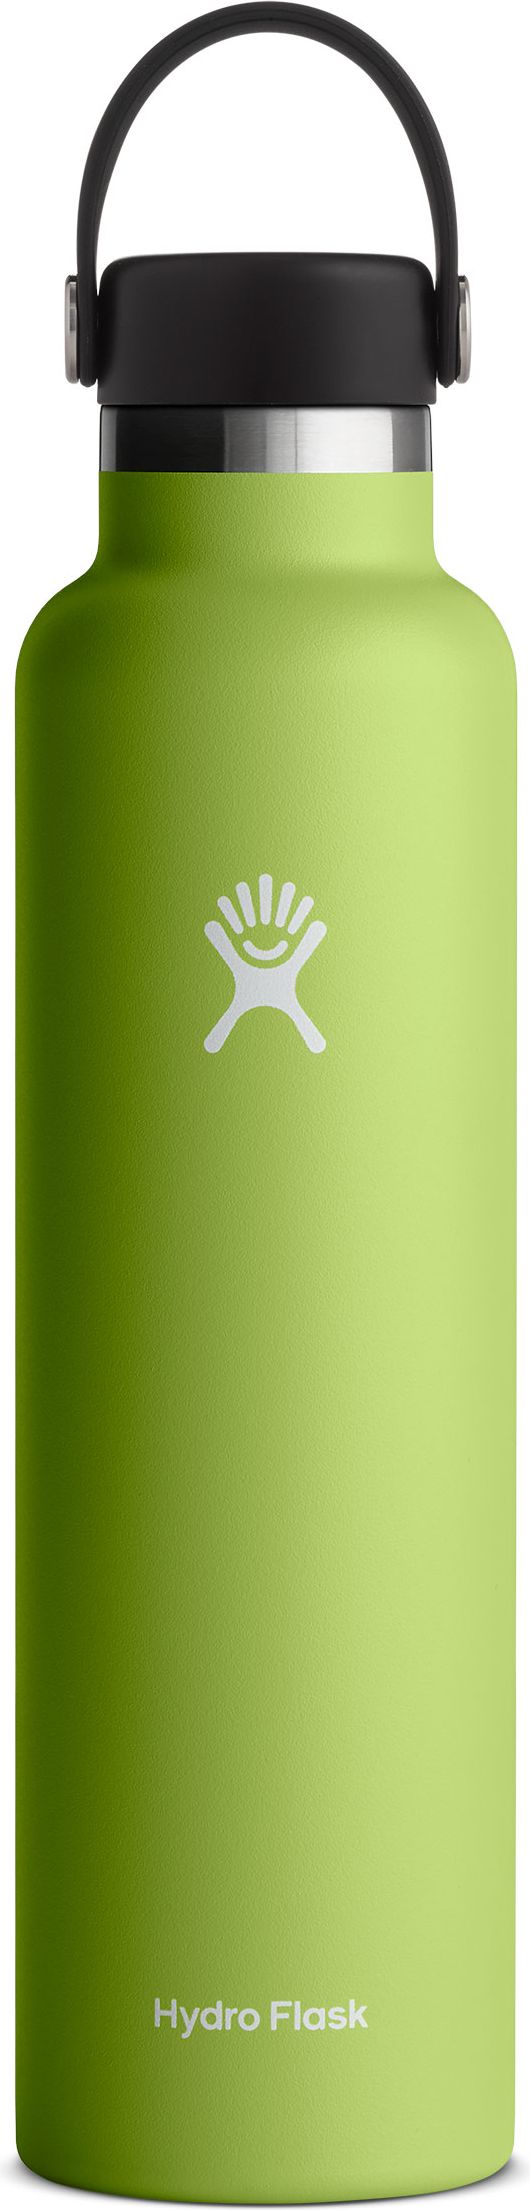 Hydro Flask Accessories 24oz Standard Mouth Seagrass